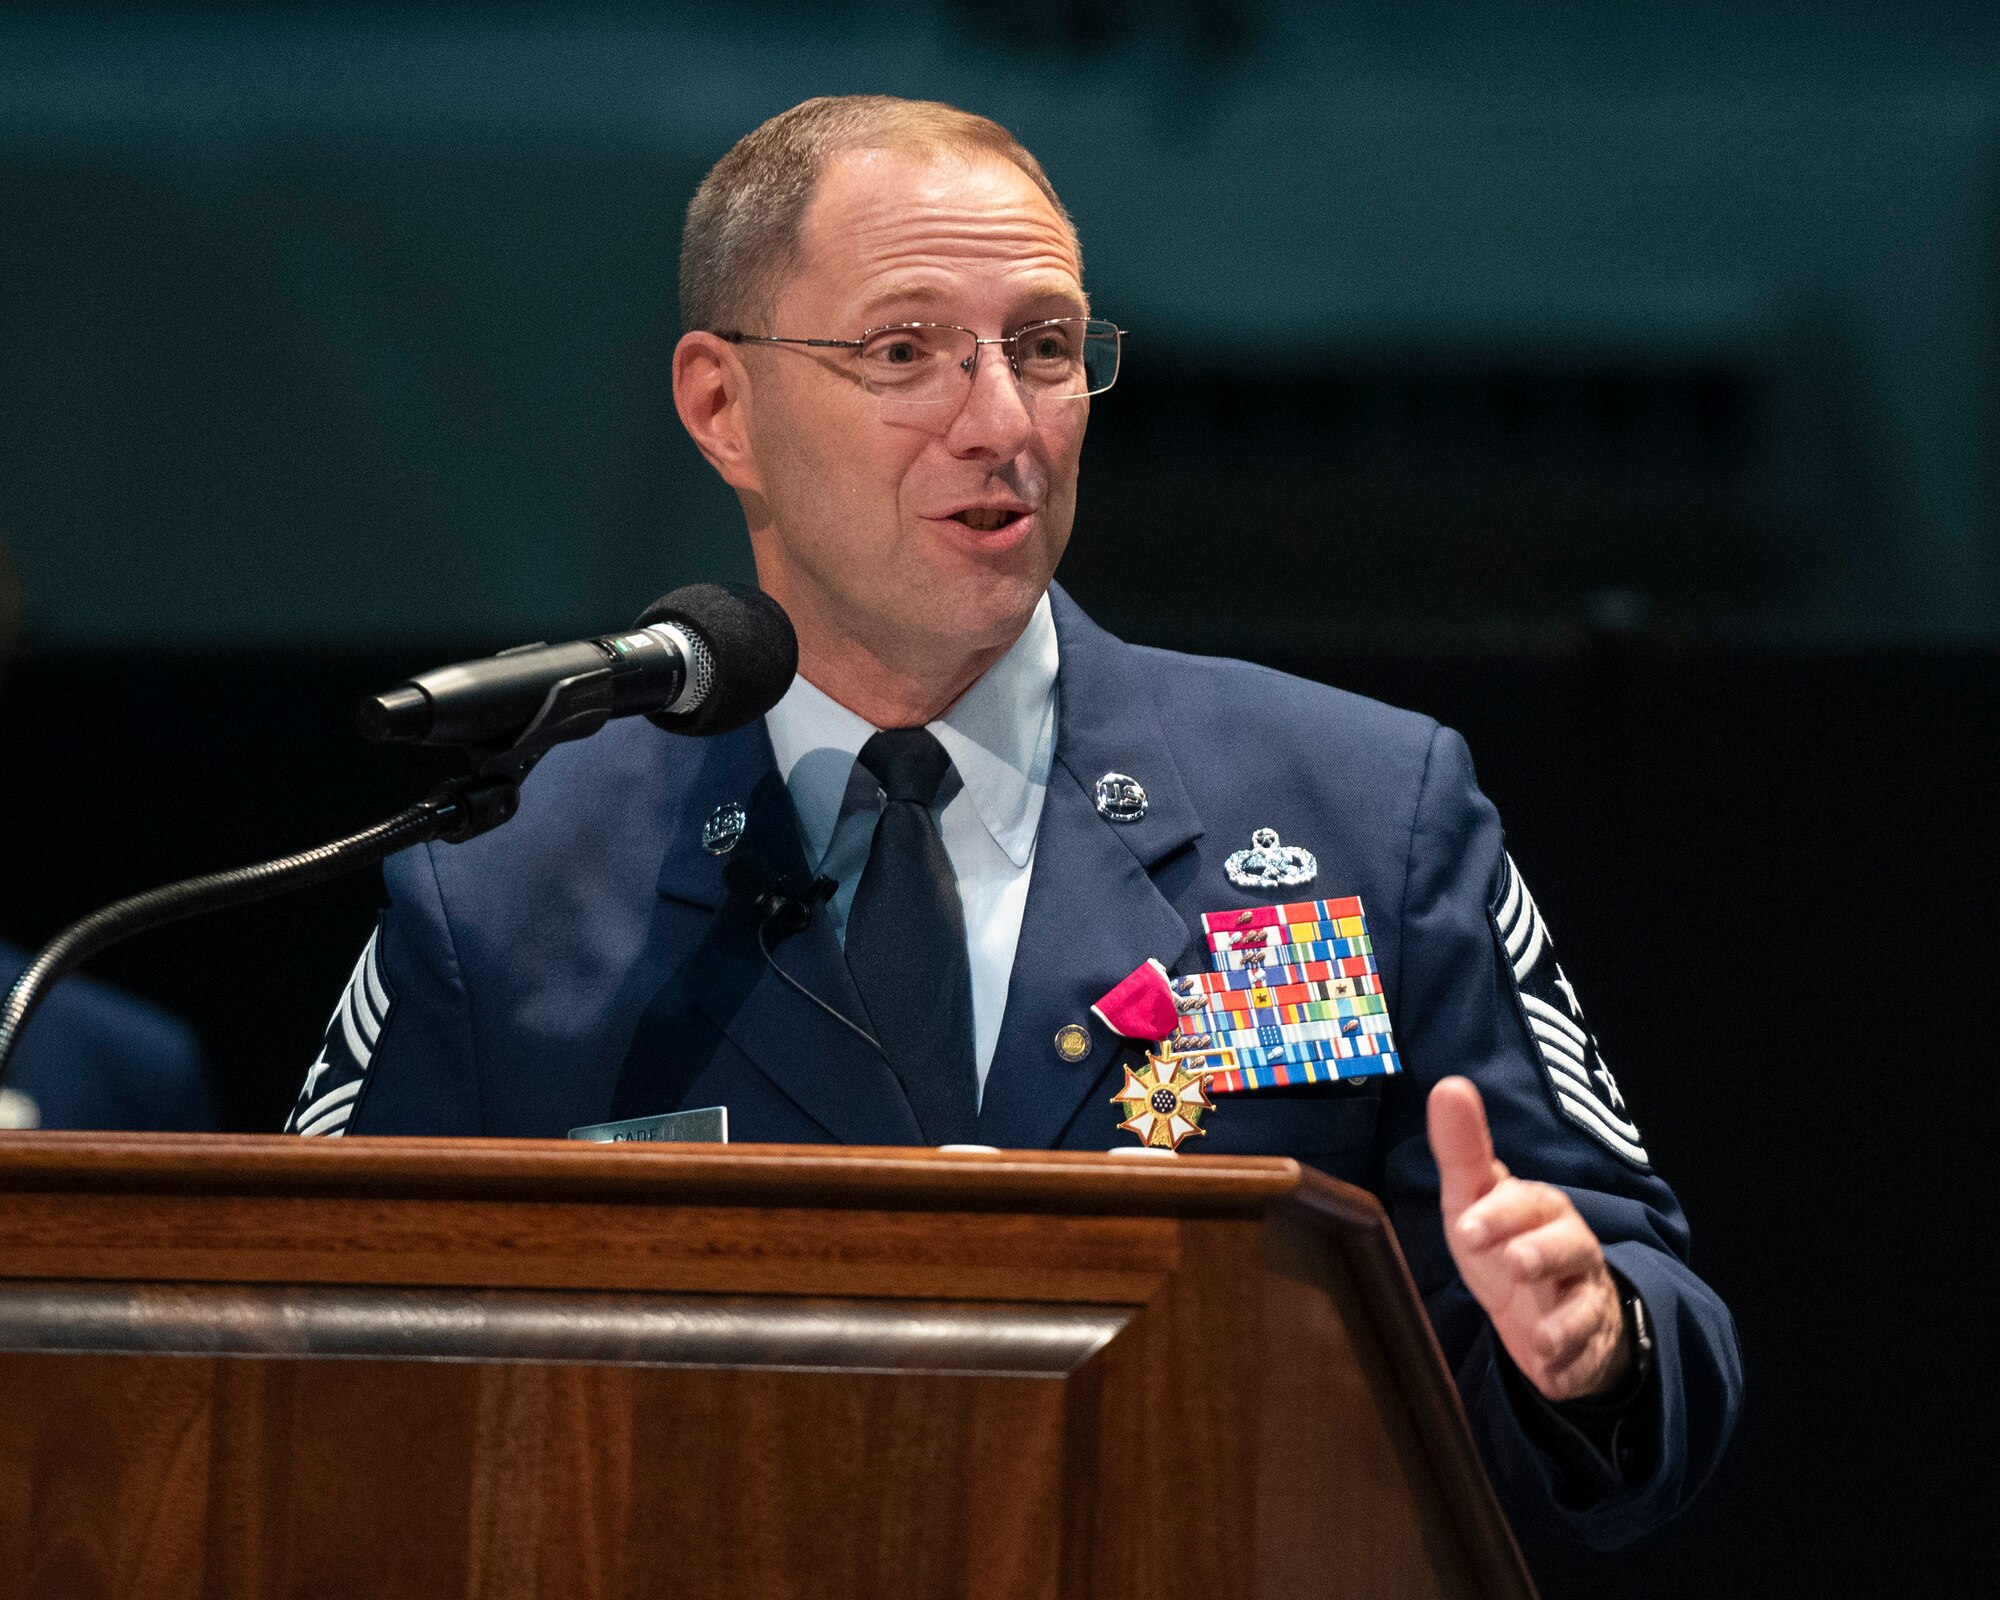 Chief Master Sgt. Stanley Cadell, Air Force Materiel Command command chief, delivers parting remarks during his retirement ceremony Oct. 1, 2021, at Wright-Patterson Air Force Base, Ohio. Cadell retired after 30 years on active duty. (U.S. Air Force photo by R.J. Oriez)